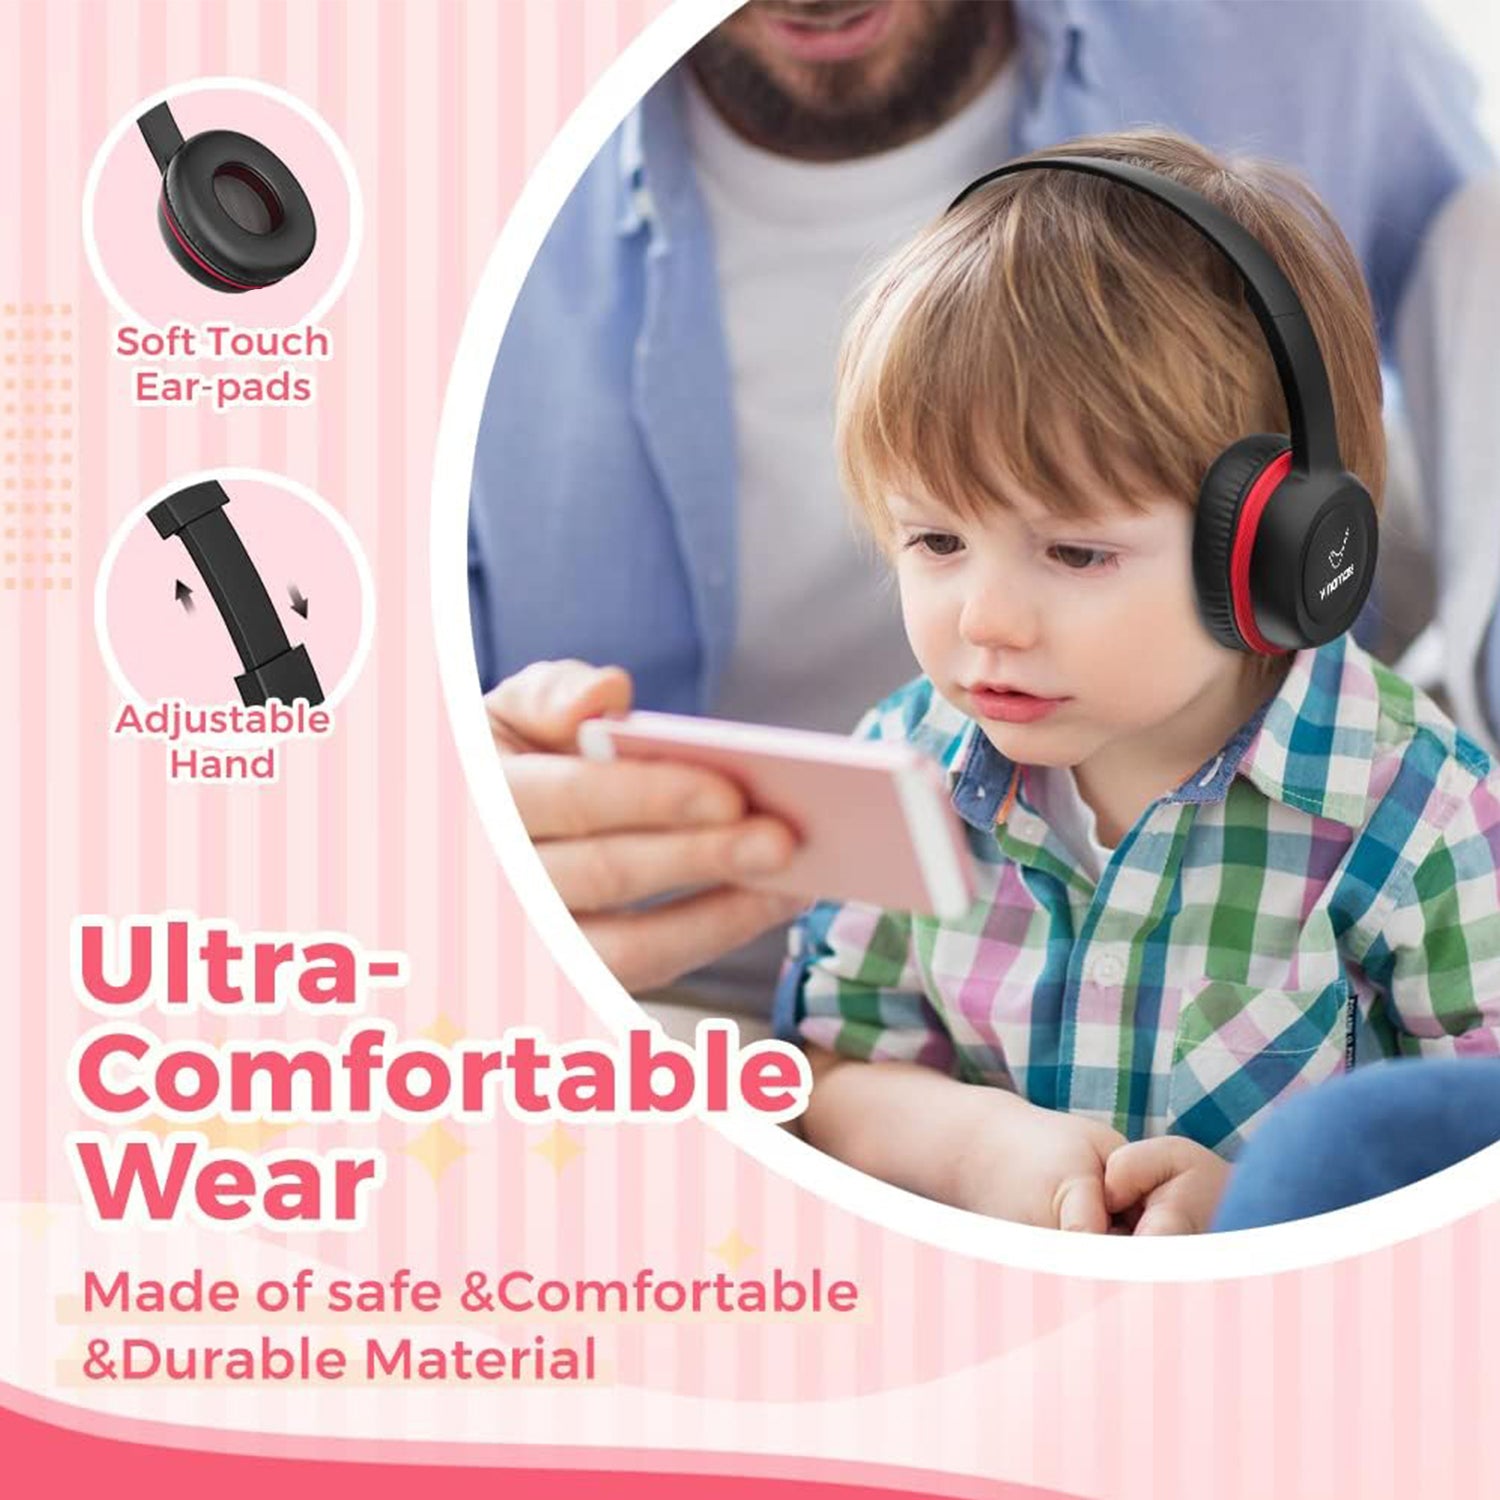 Ear Headphones for Kids, Headphones with Safe Volume Limiter 85dB, Adjustable and Flexible for Kids, Boys, Girls,Suit for School Classroom Students Teens Children